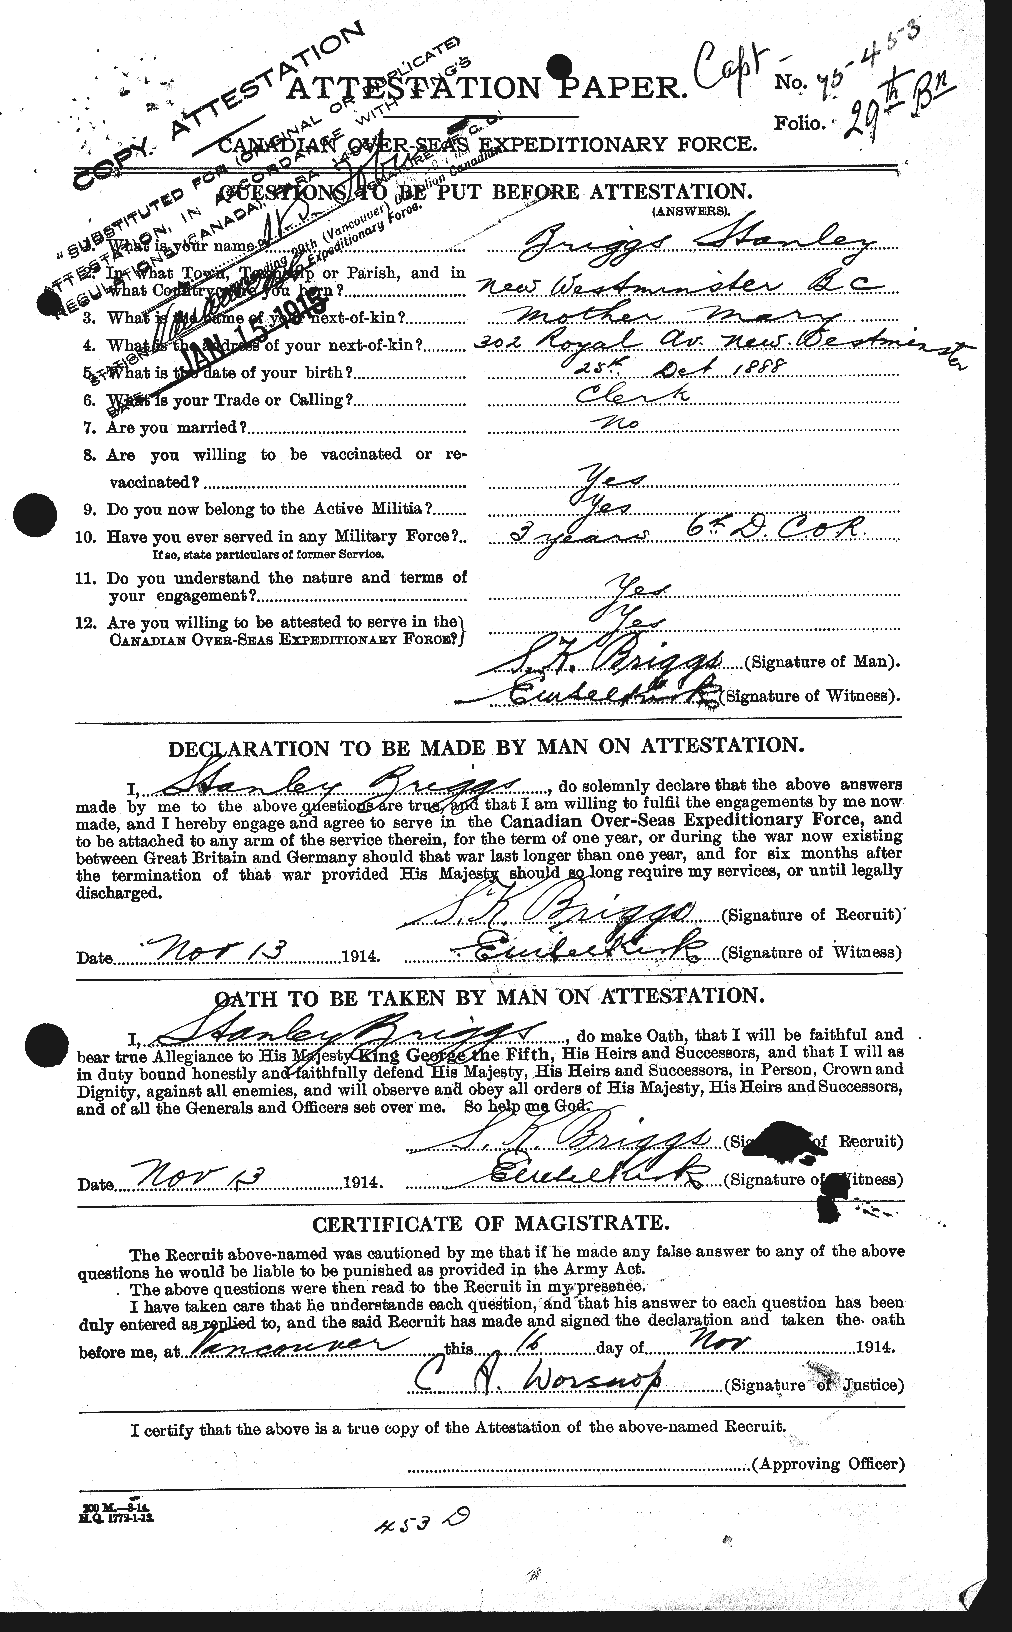 Personnel Records of the First World War - CEF 264096a